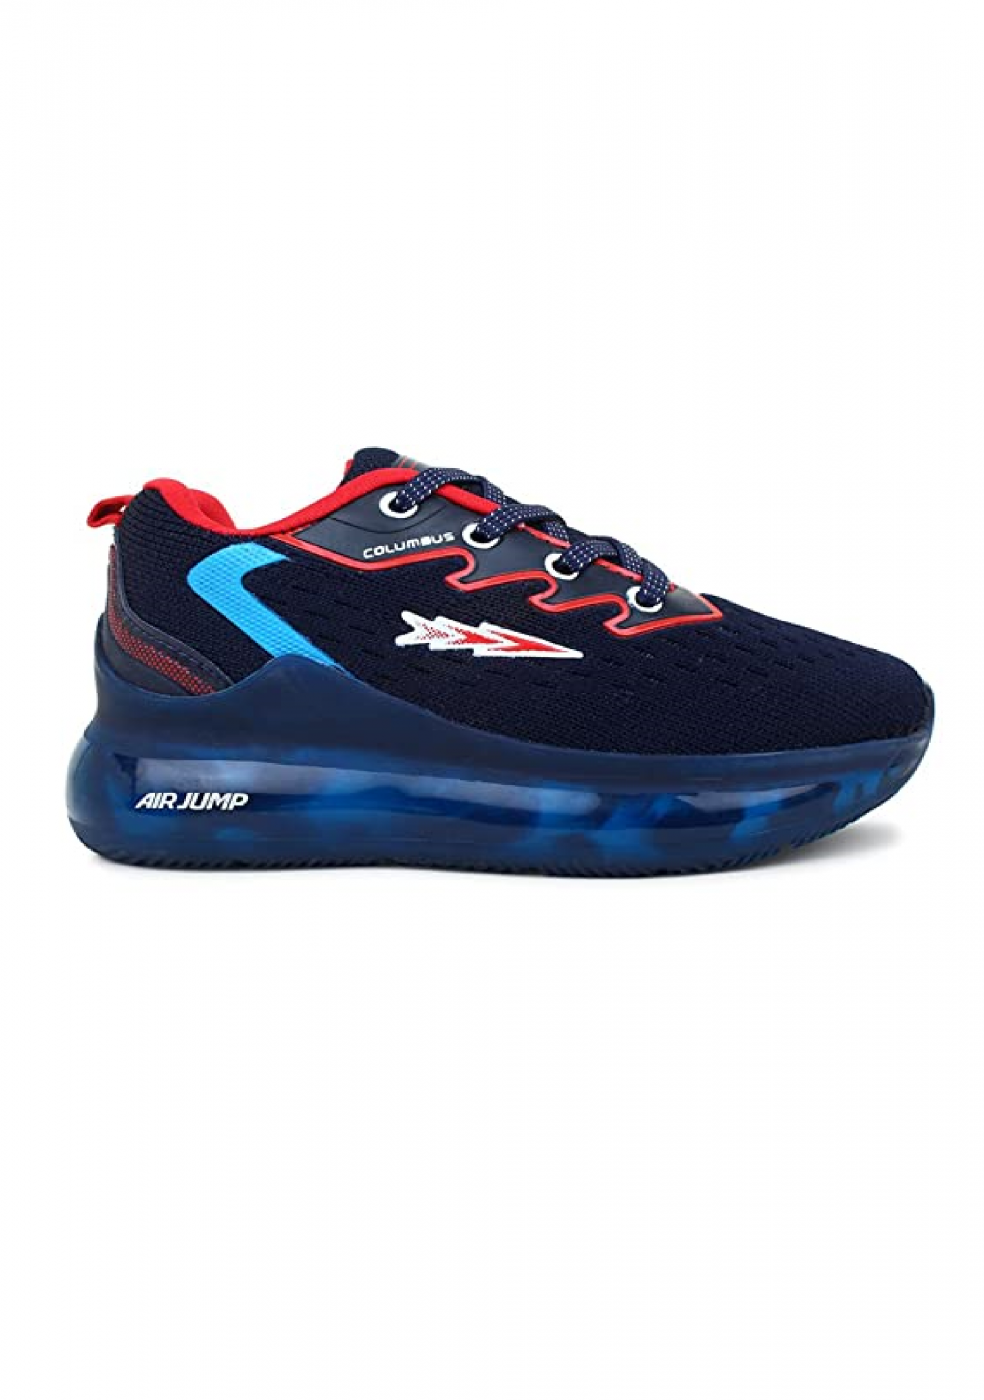 Columbus Blue Kids Sports Shoes With laces